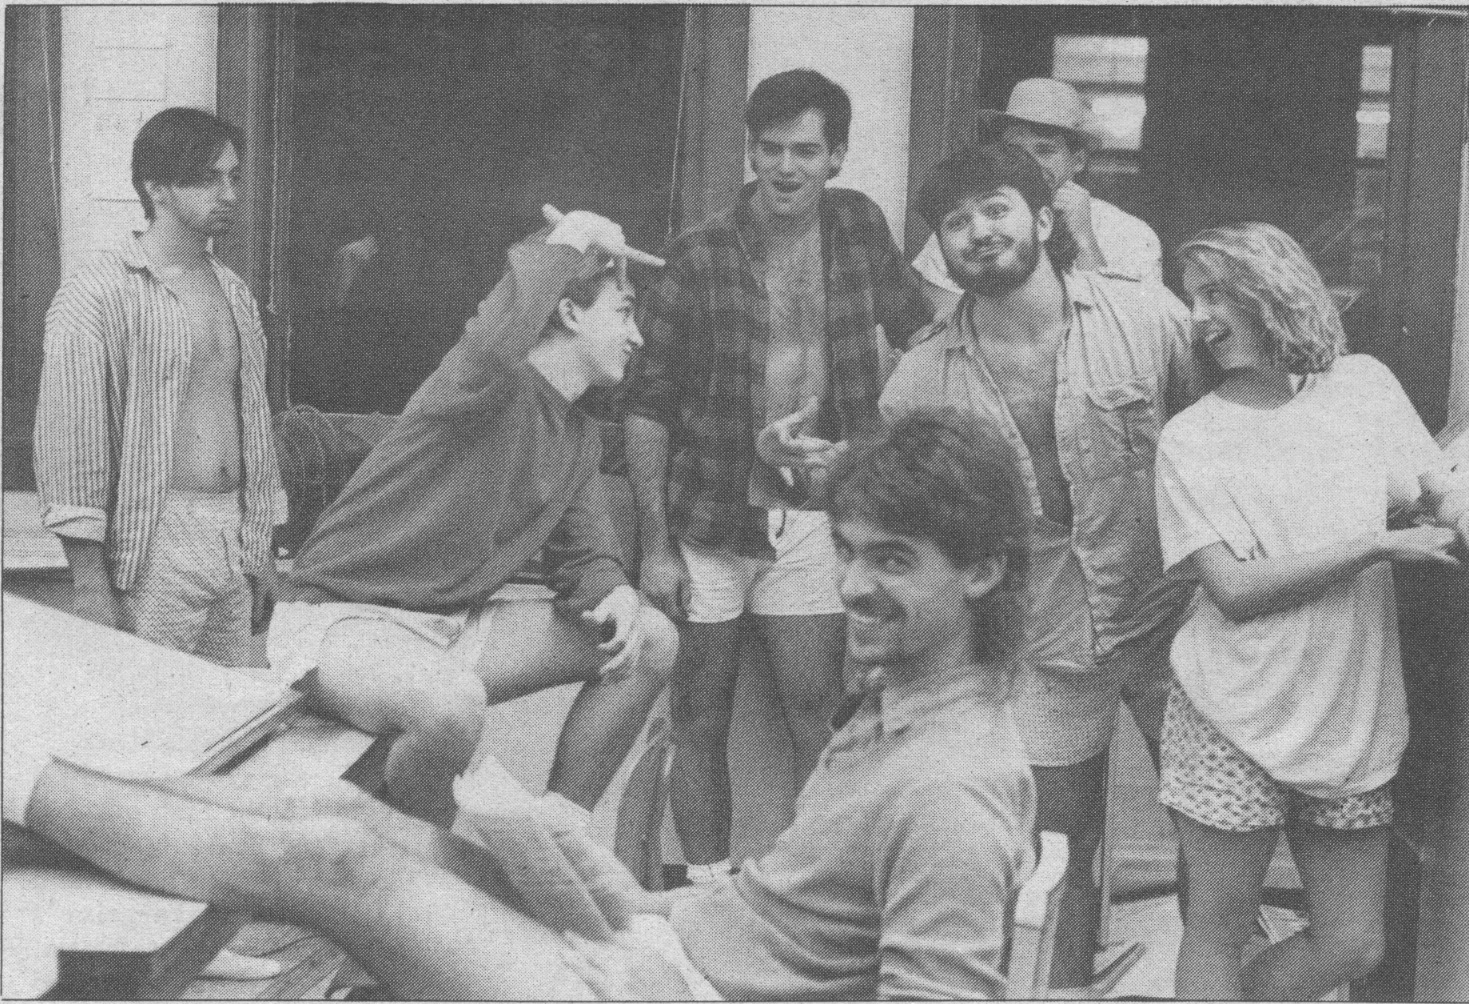 Students wear briefs for a picture in the 1988 Record "News in Briefs" column